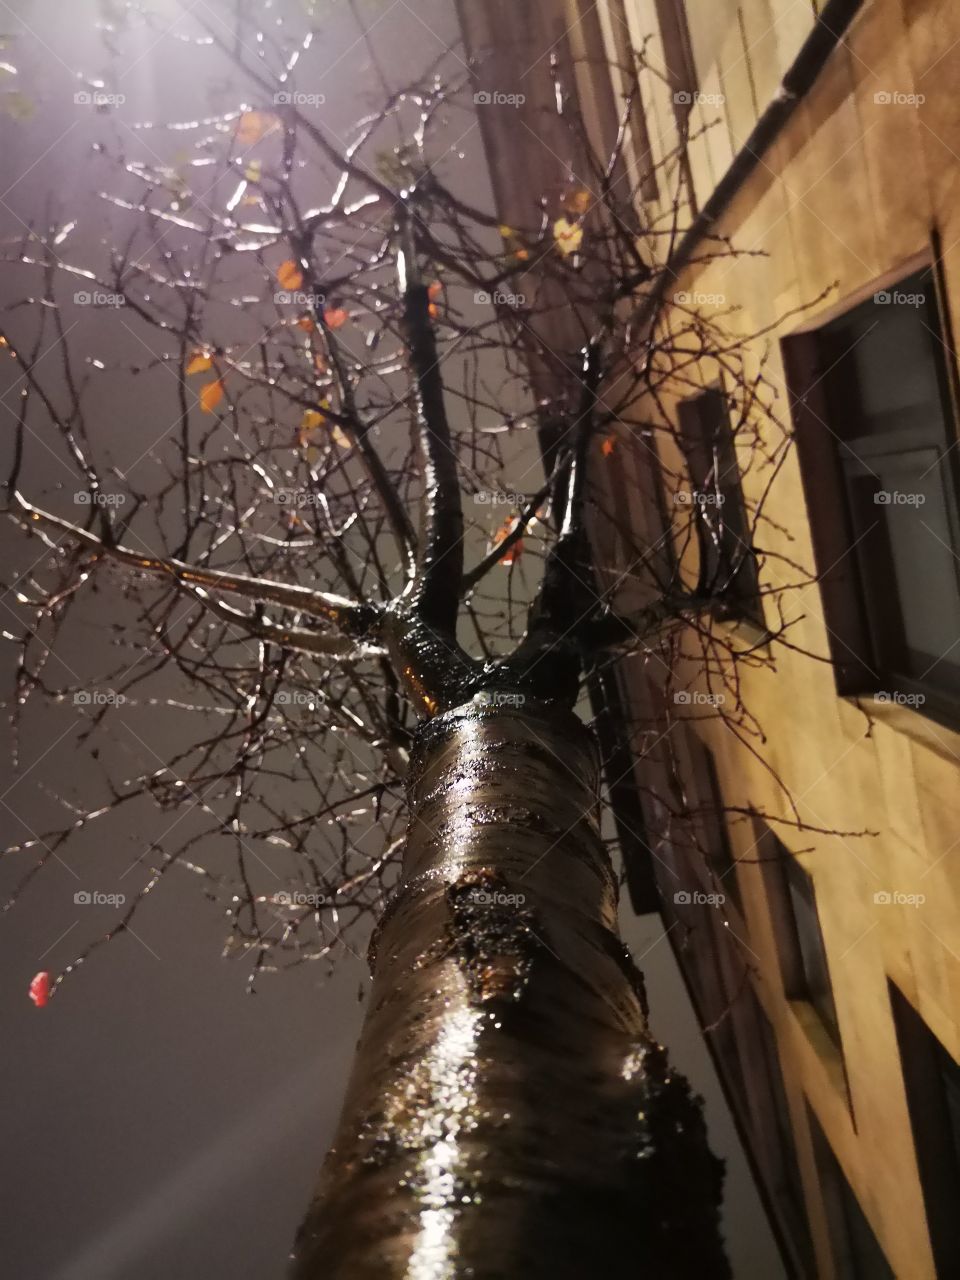 The tree with rein in the city